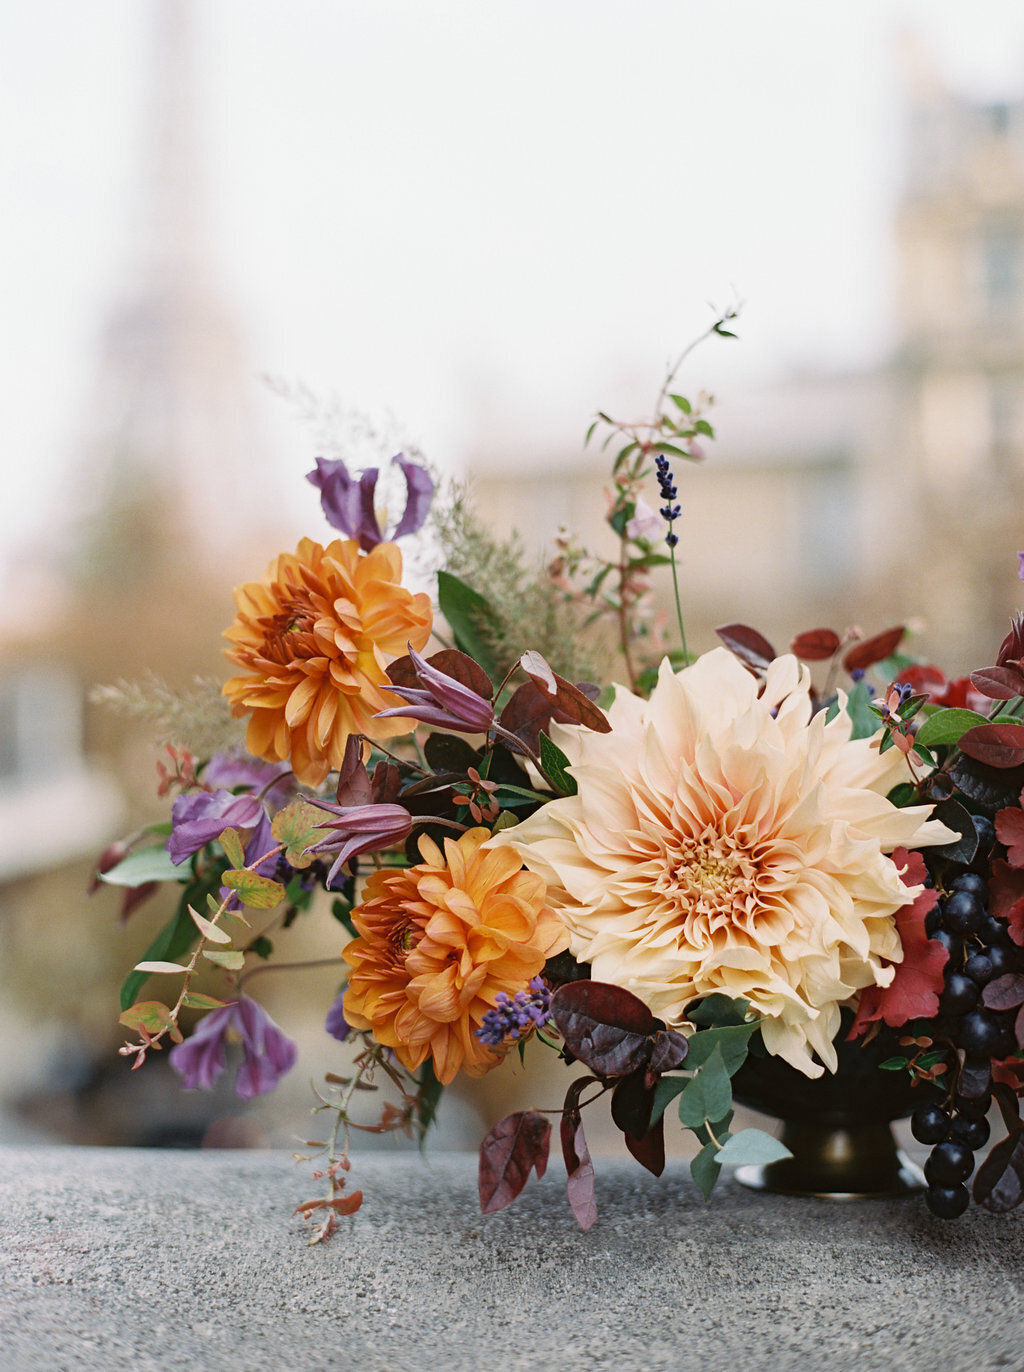 Parisian inspired floral design in autumn Paris wedding. Fall colored flowers of dahlias, berried, and branches. Design by Rosemary & Finch Floral Design in  Nashville, TN.